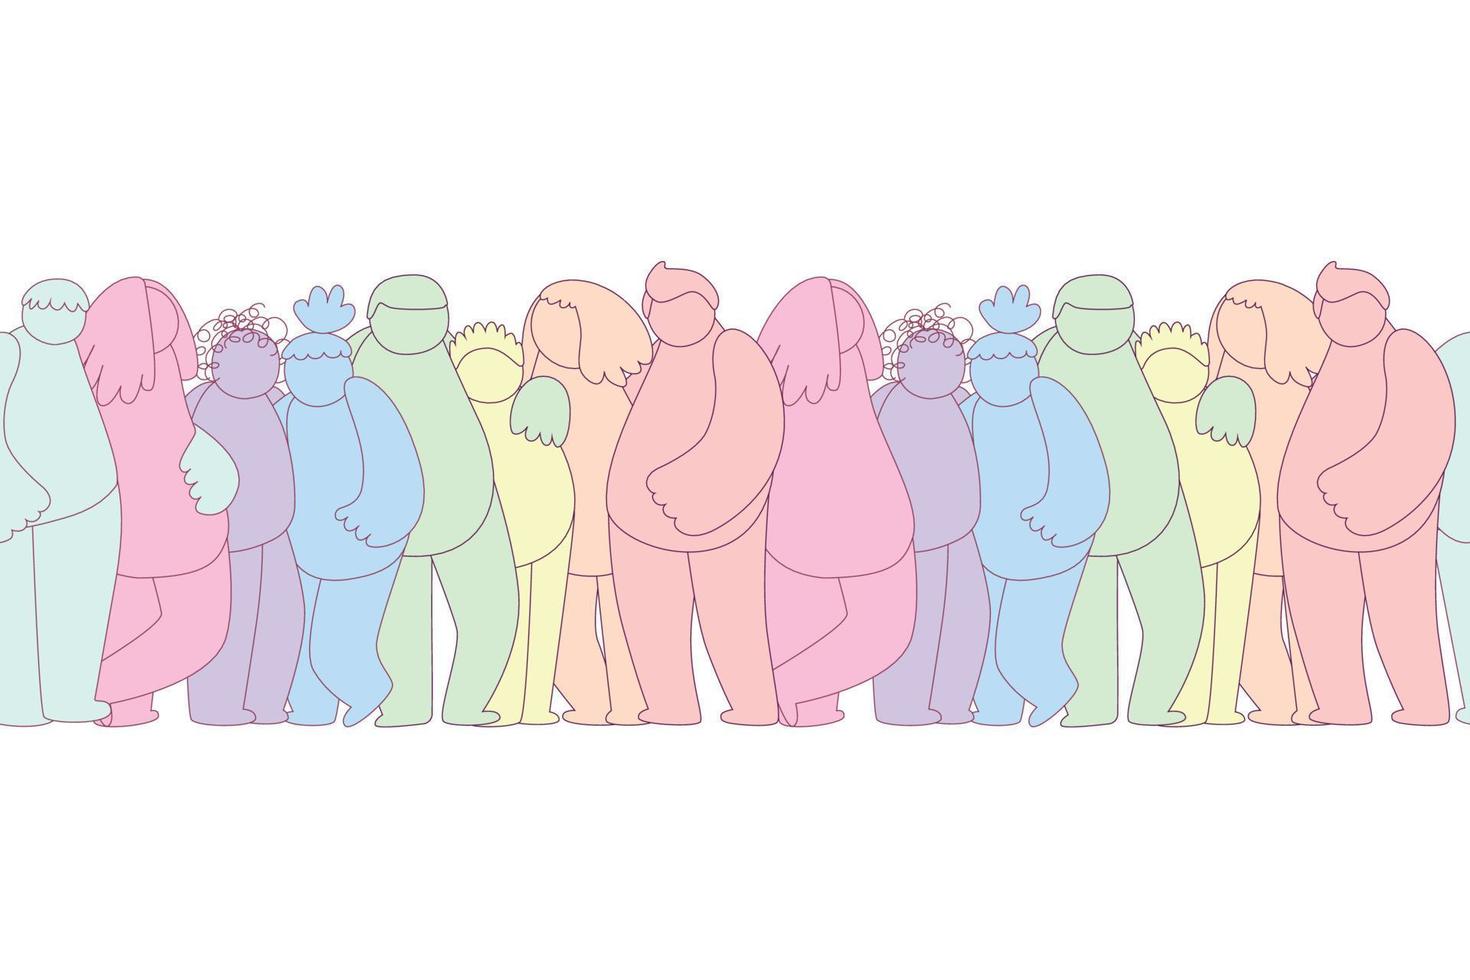 horizontal seamless border group of abstract diverse people. Friends, coworkers,volunteer standing, hugging together. Cartoon doodle characters. Teamwork, togetherness, friendship concept vector